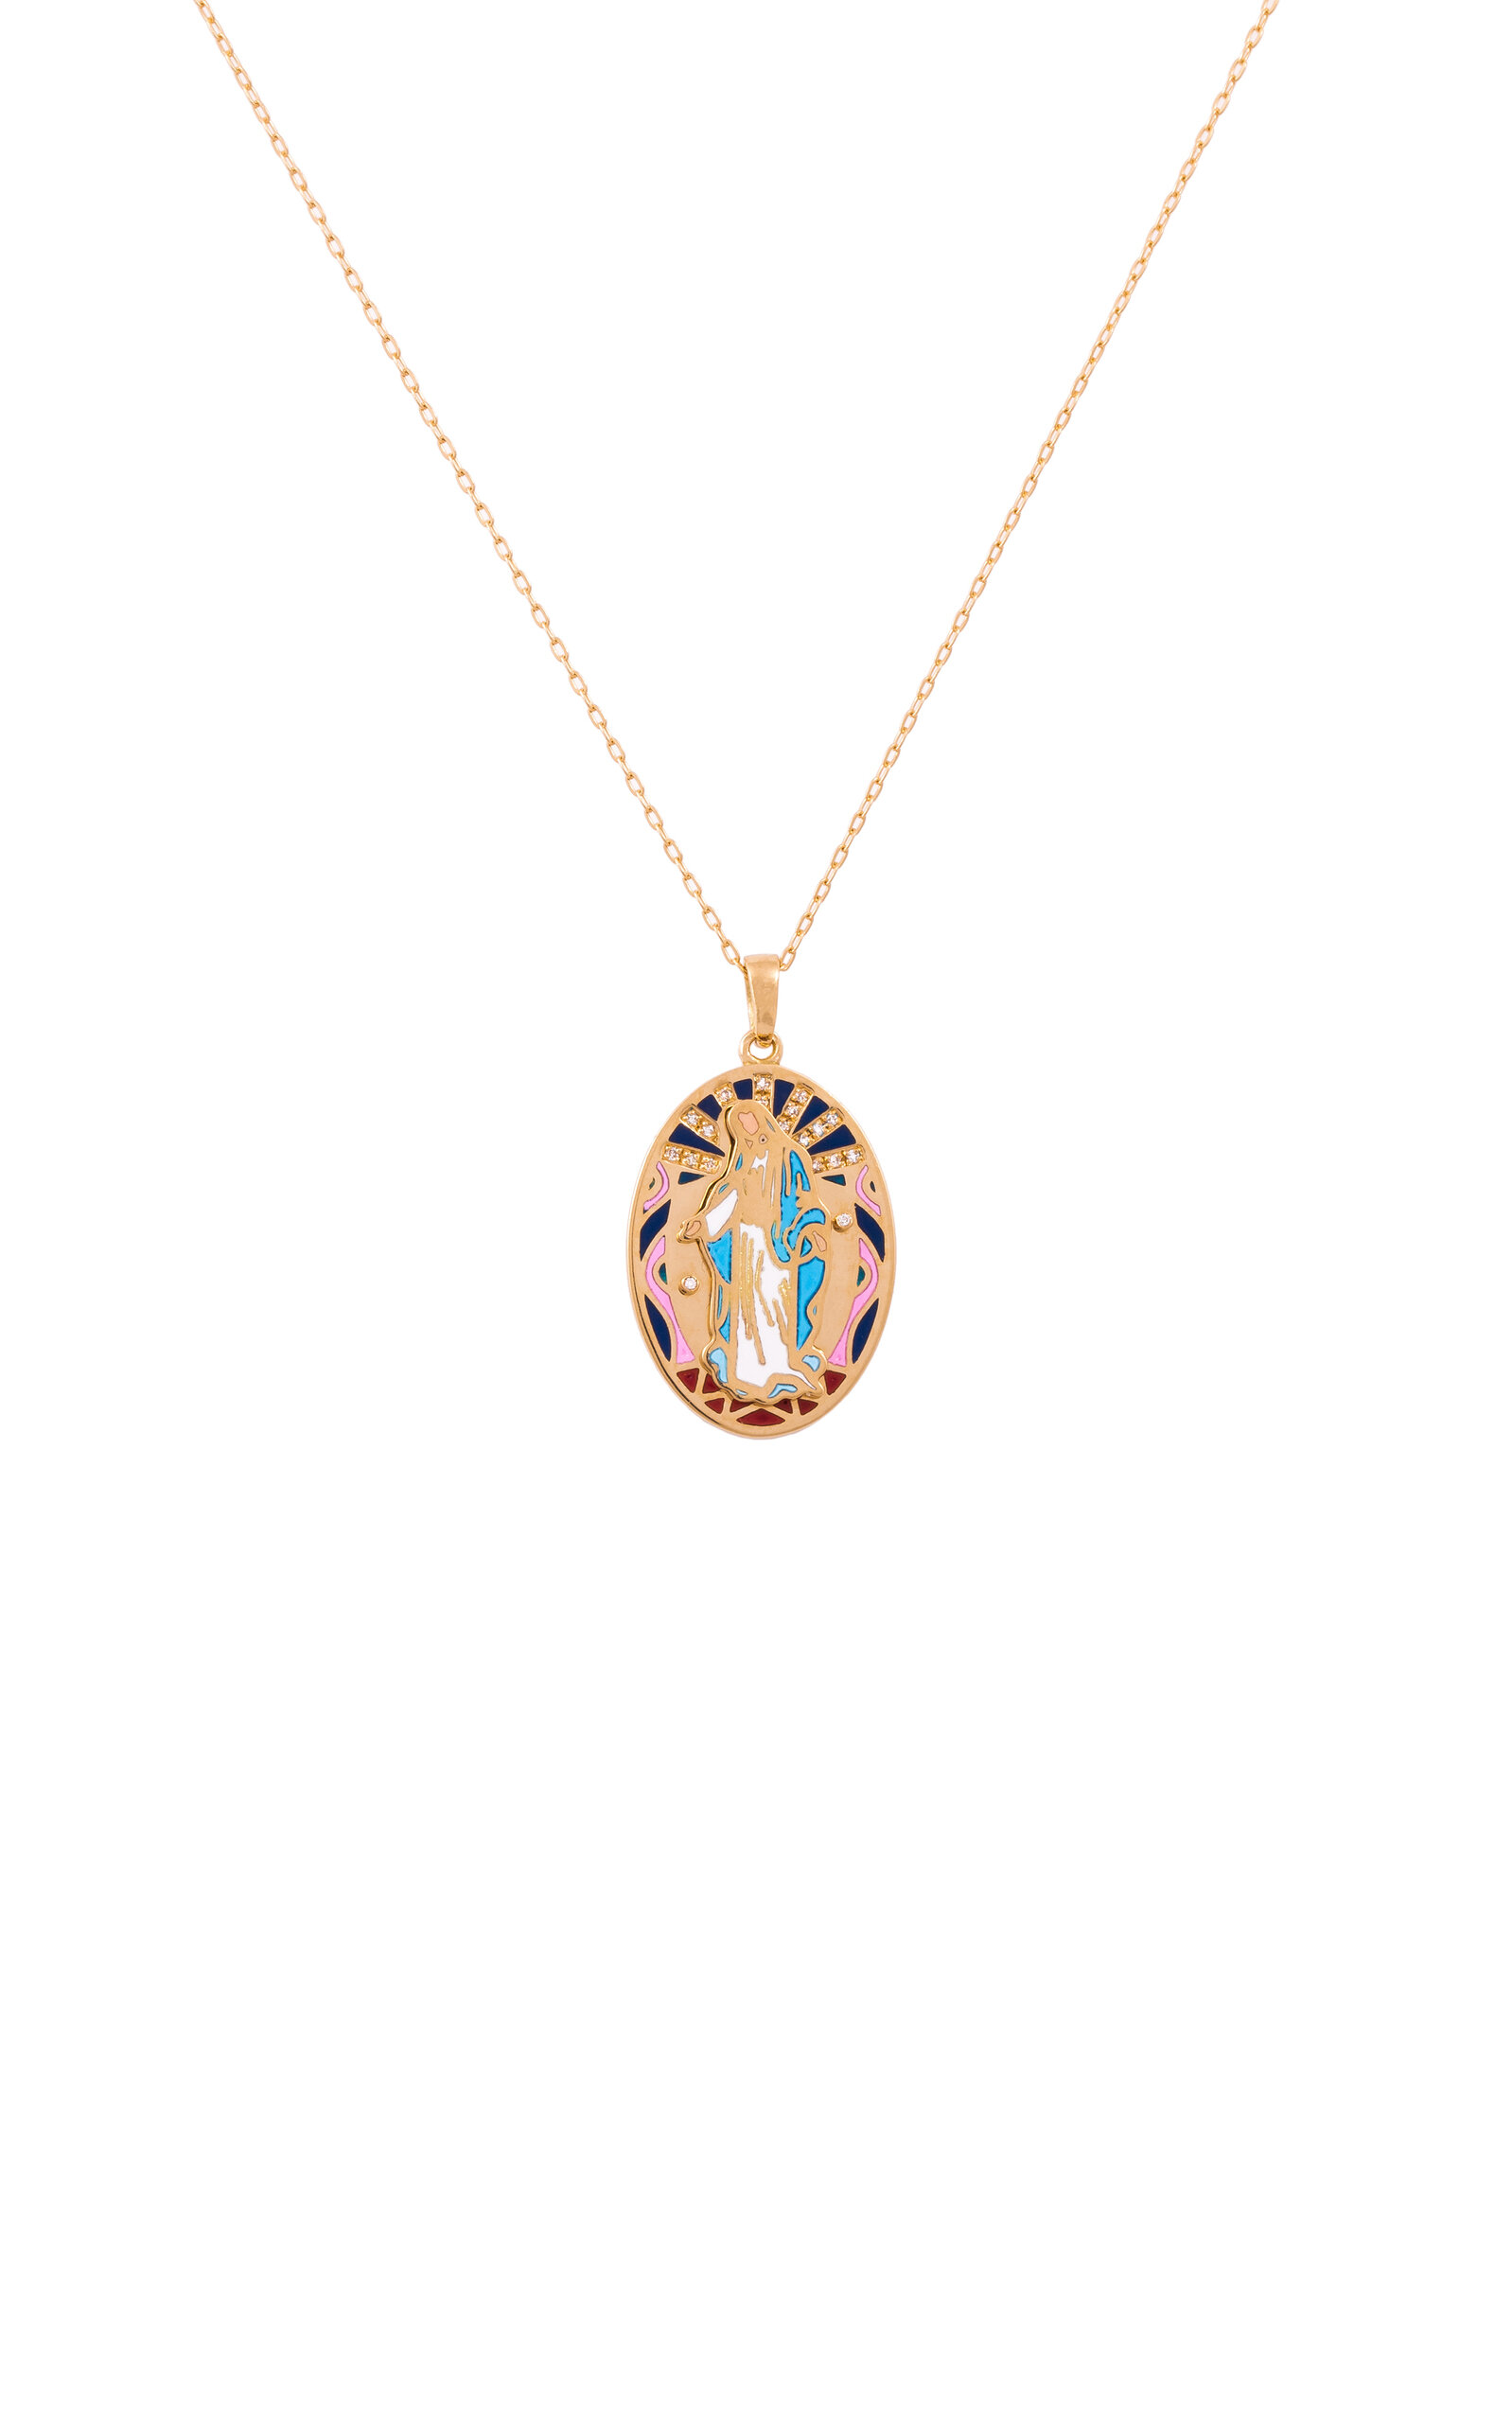 L'atelier Nawbar 18k Yellow Gold Big Celestial Mary Diamond And Colored Enamel Necklace In Multi